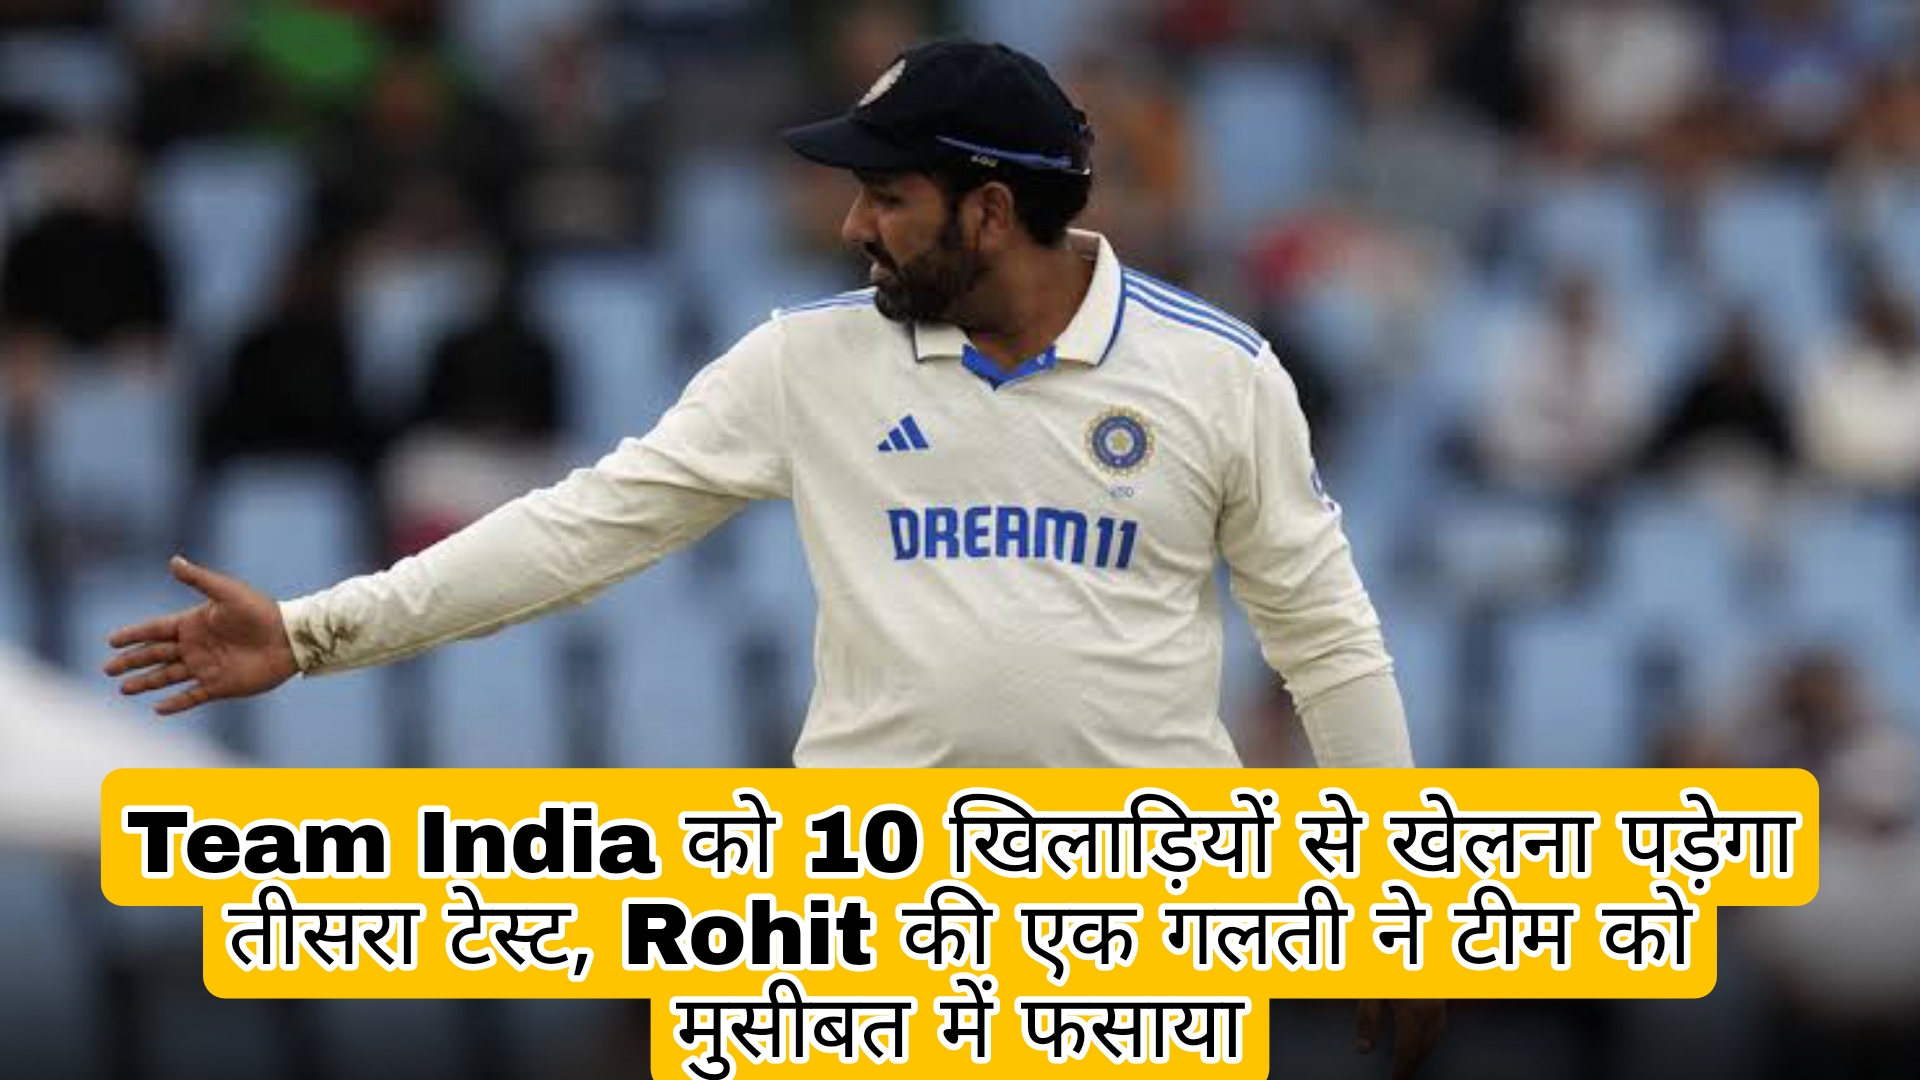 Rohit's one mistake put Team India in trouble